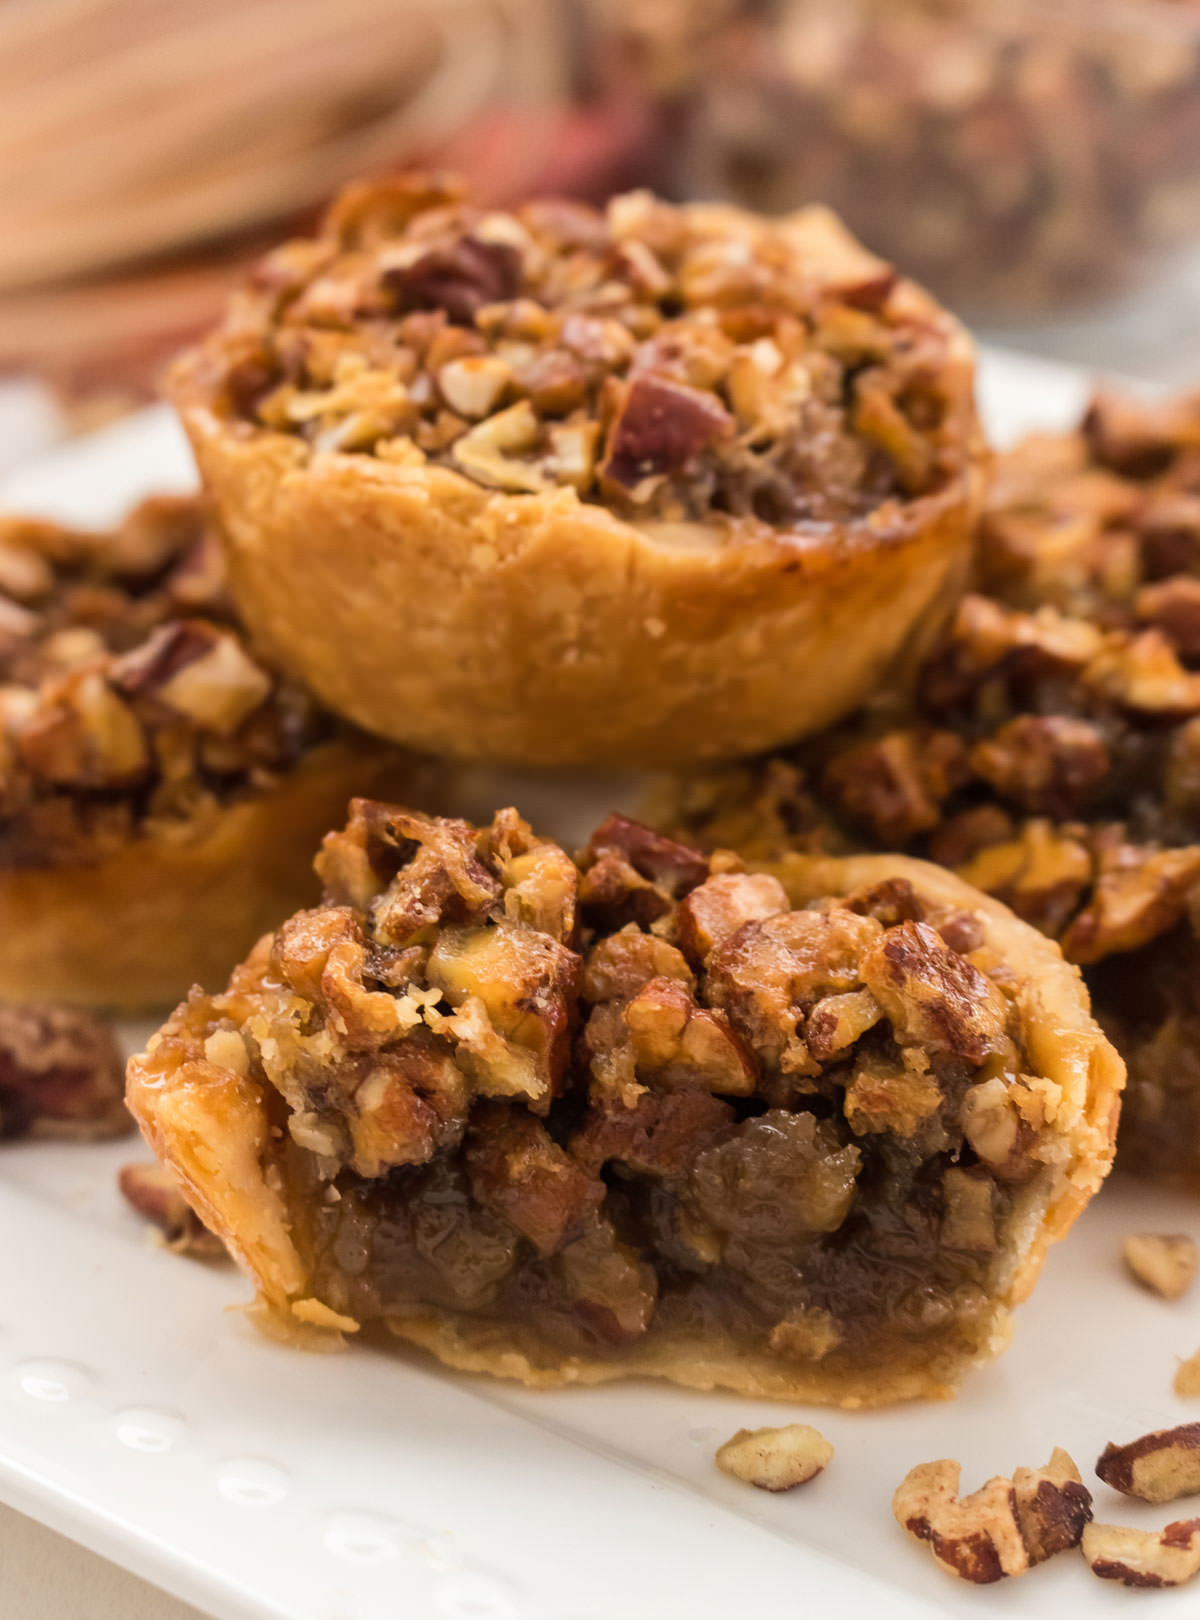 Closeup on five Mini Pecan Pies sitting on a white plate in front of a glass bowl filled with chopped pecans.